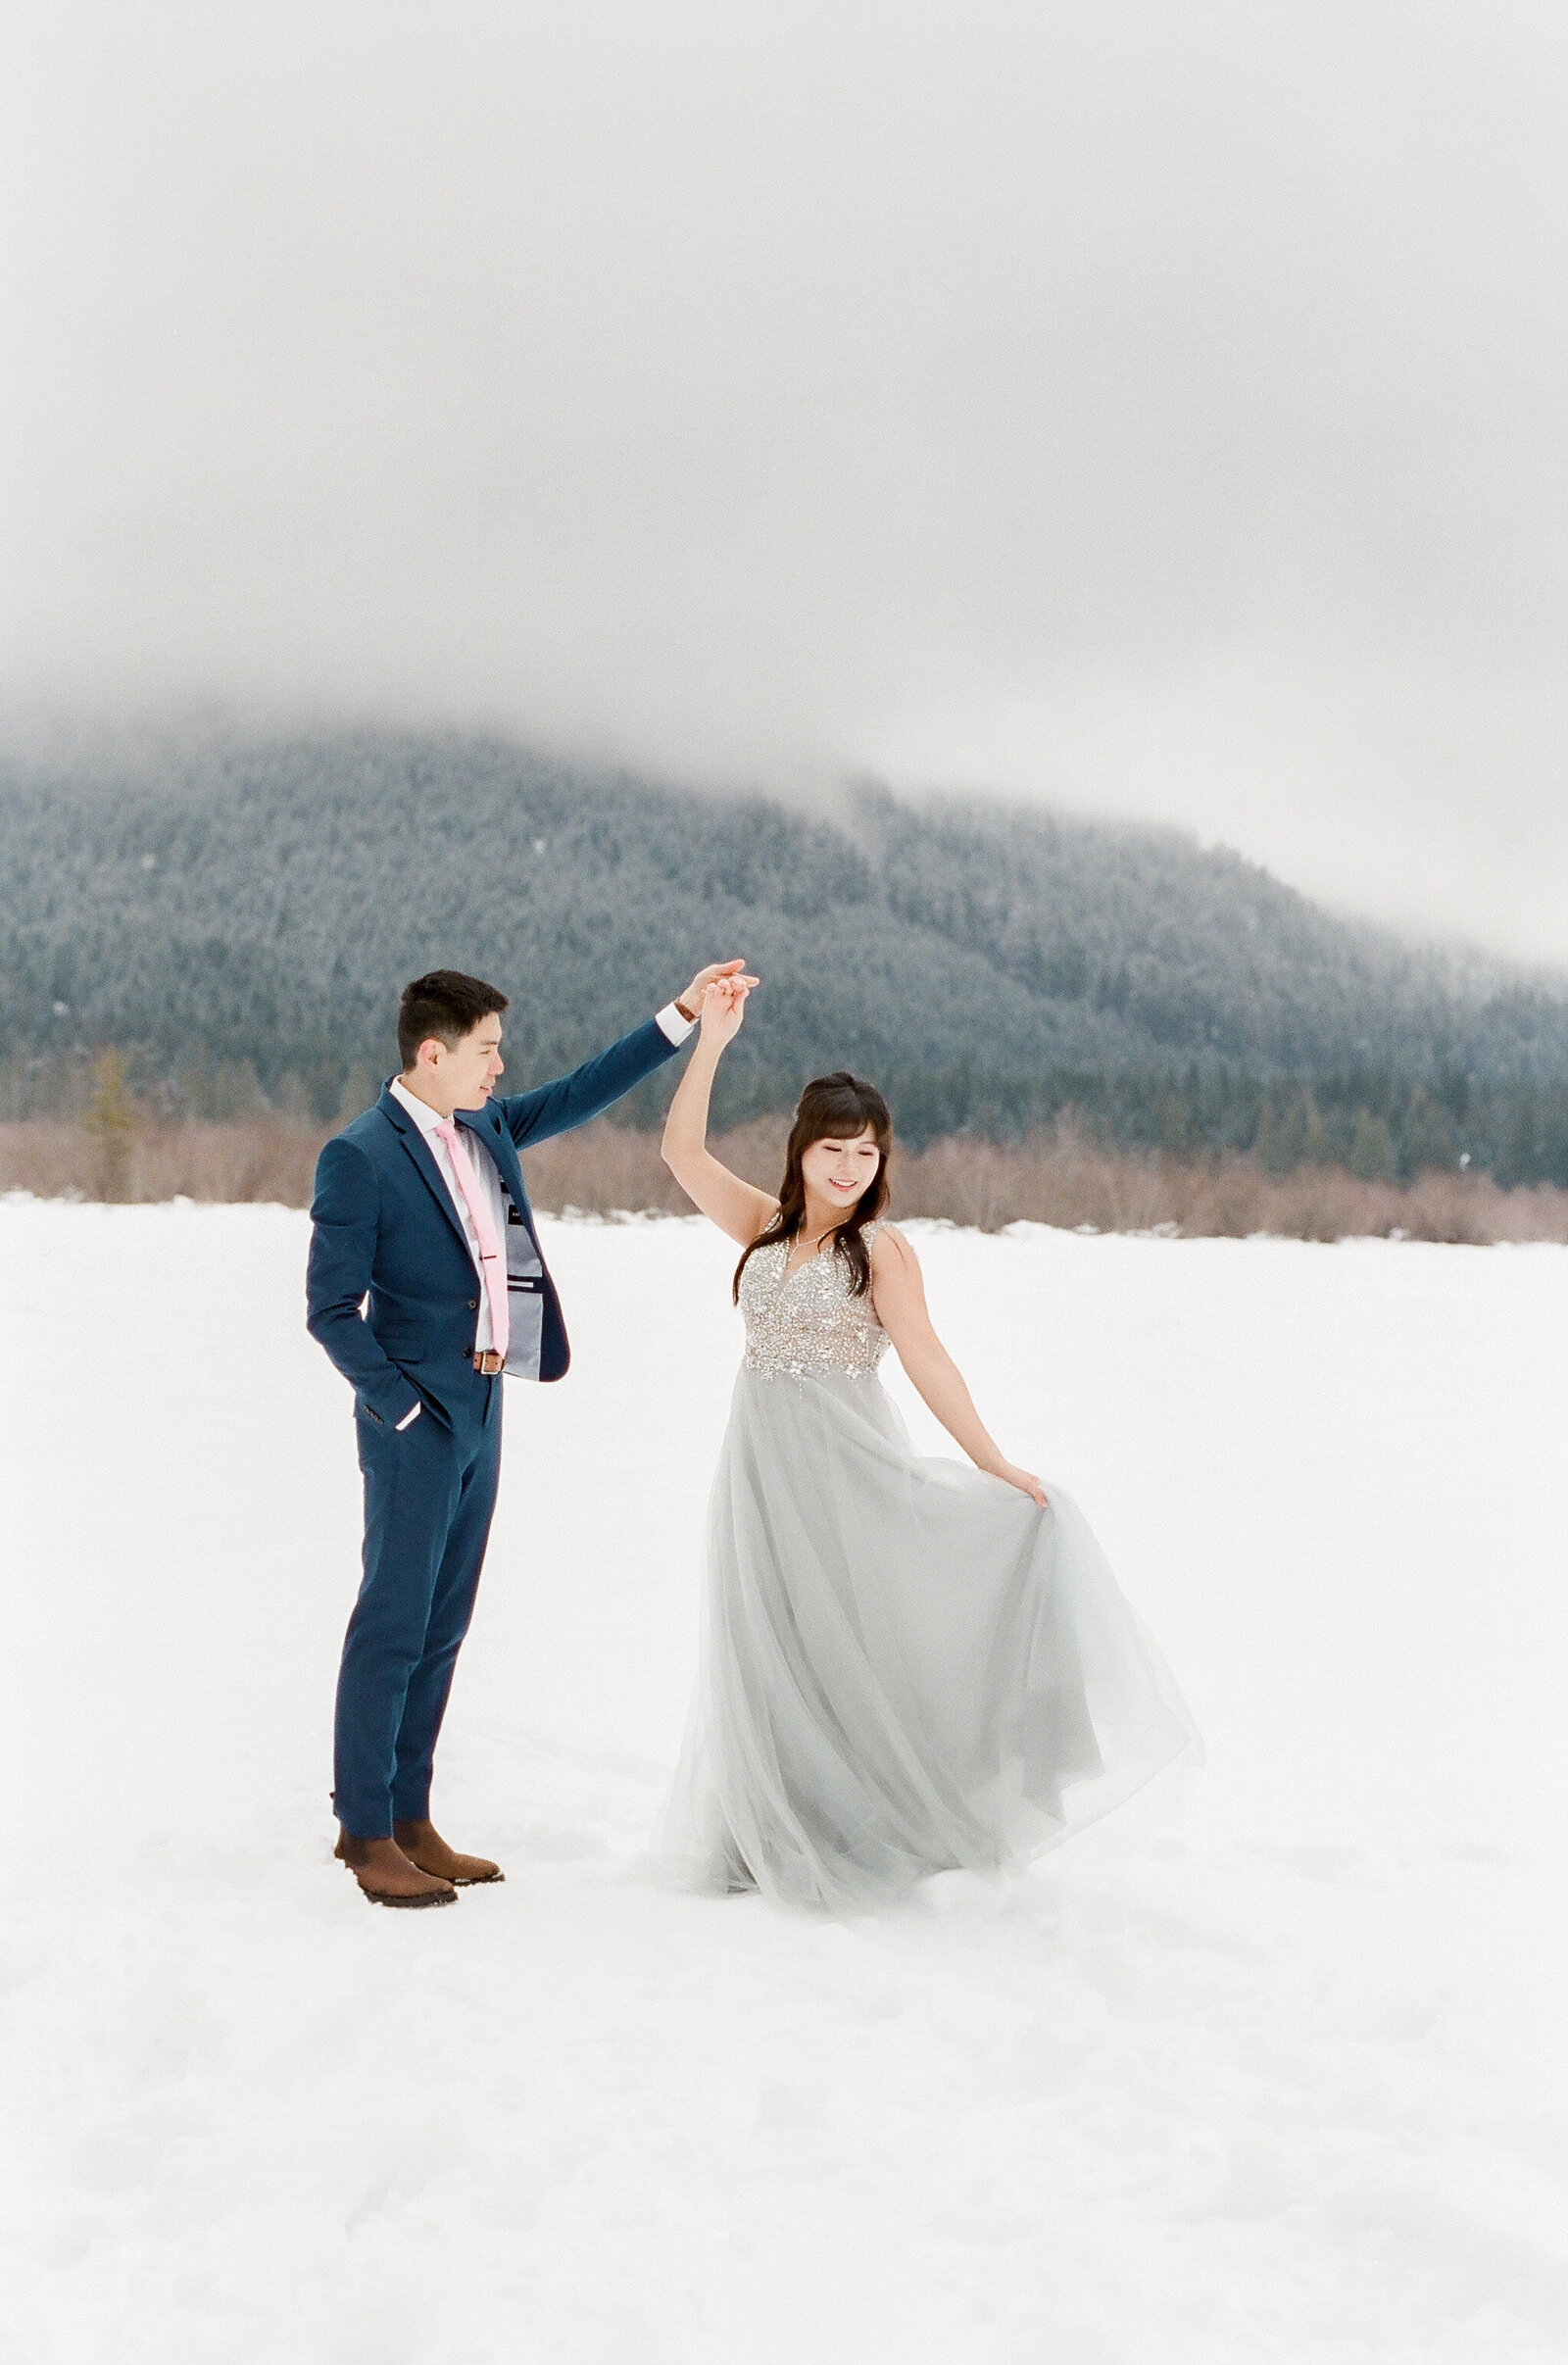 Annie and James Winter Session at Snoqualmie Pass - Kerry Jeanne Photography (83 of 178)